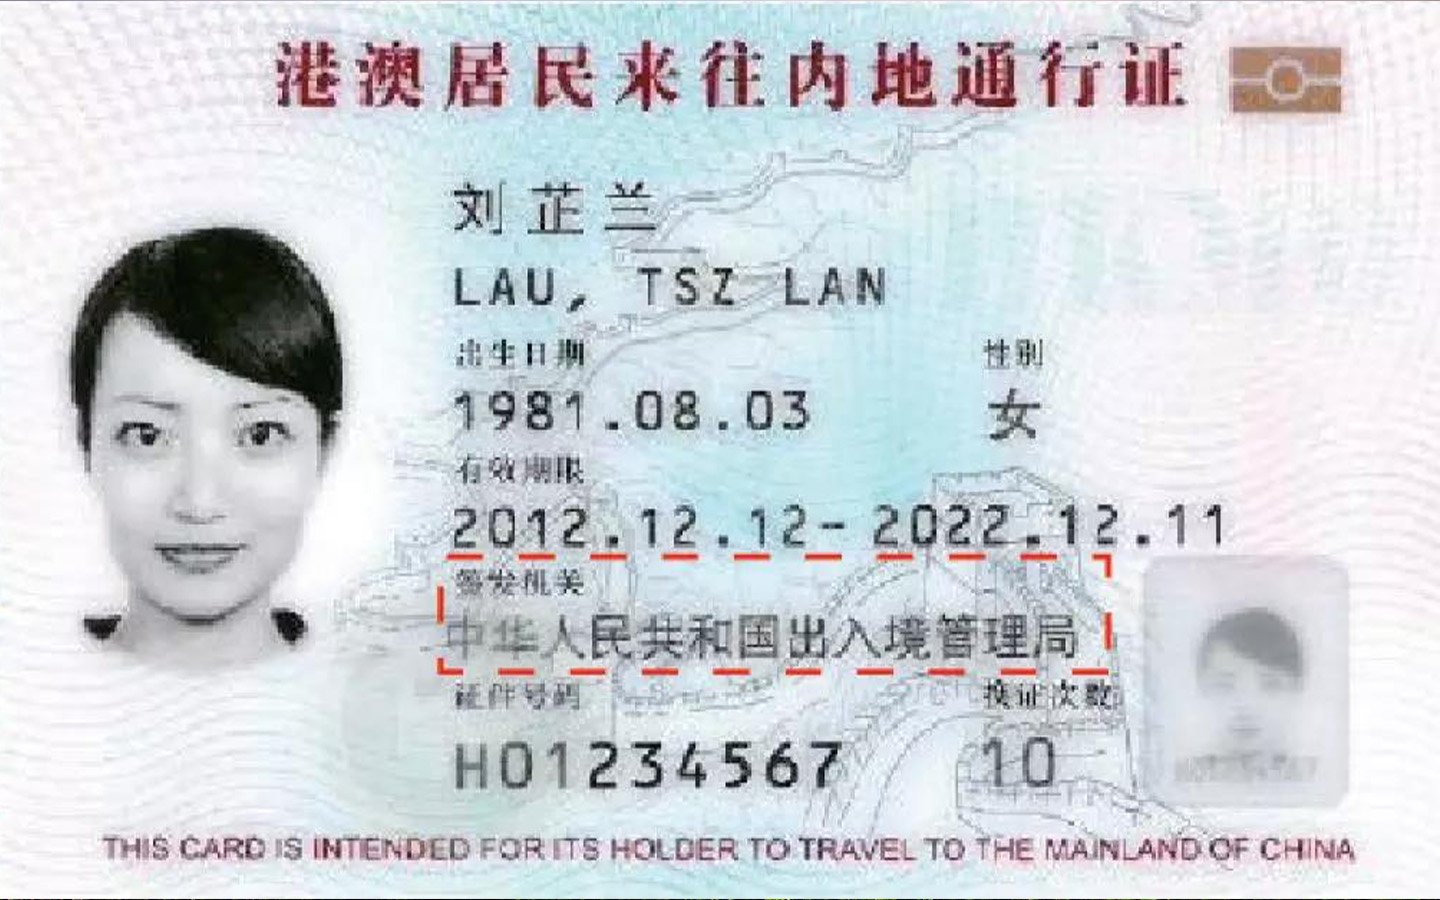 Applications begin for new Mainland Travel Permits